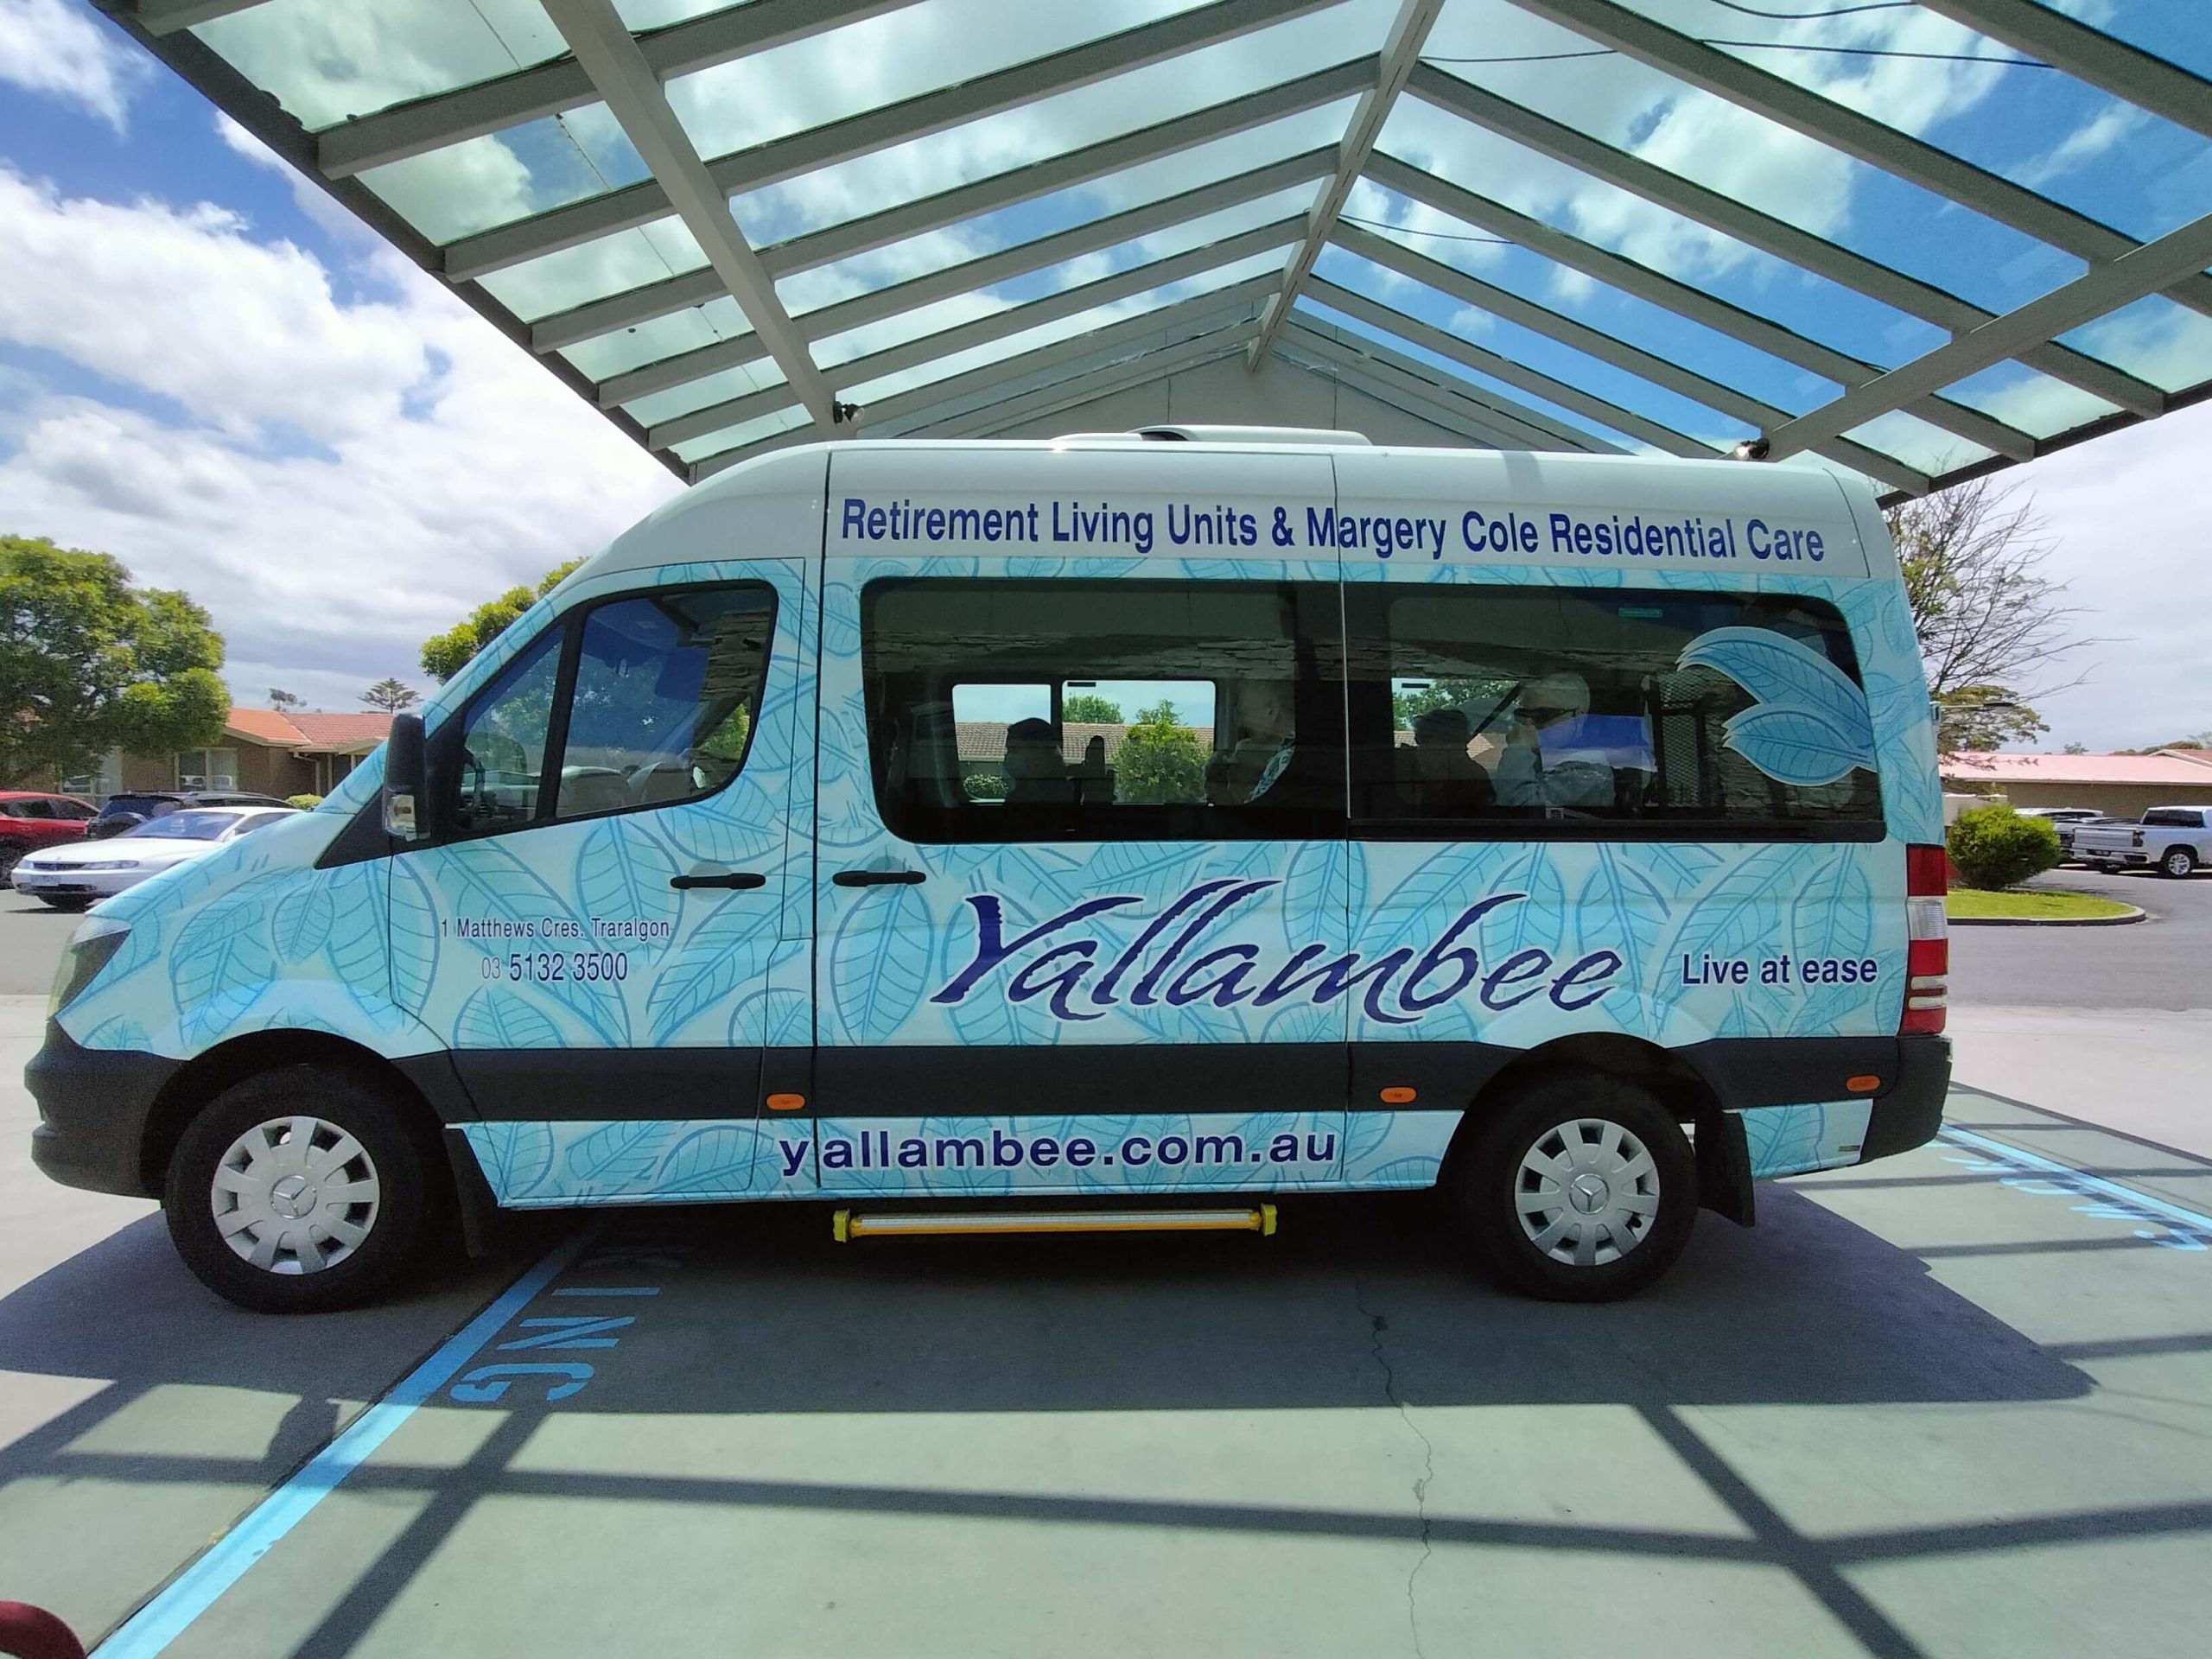 Photo of the Yallambee Aged Care mini bus with signage wrap on it.